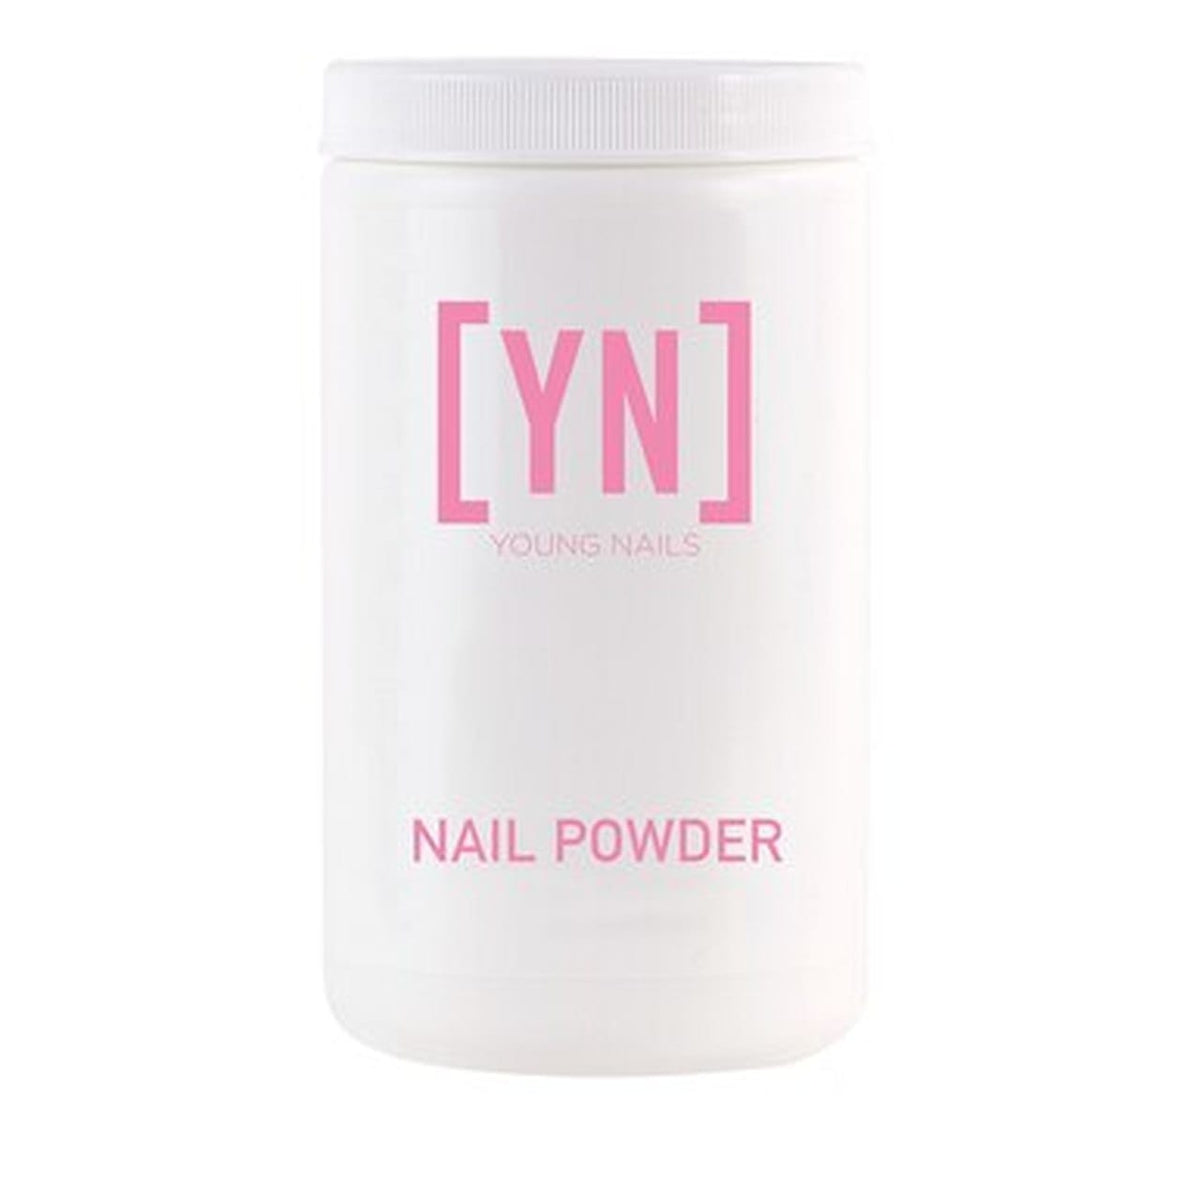 660g Speed Pink Powder Nails - Young Nails - Luxe Pacifique